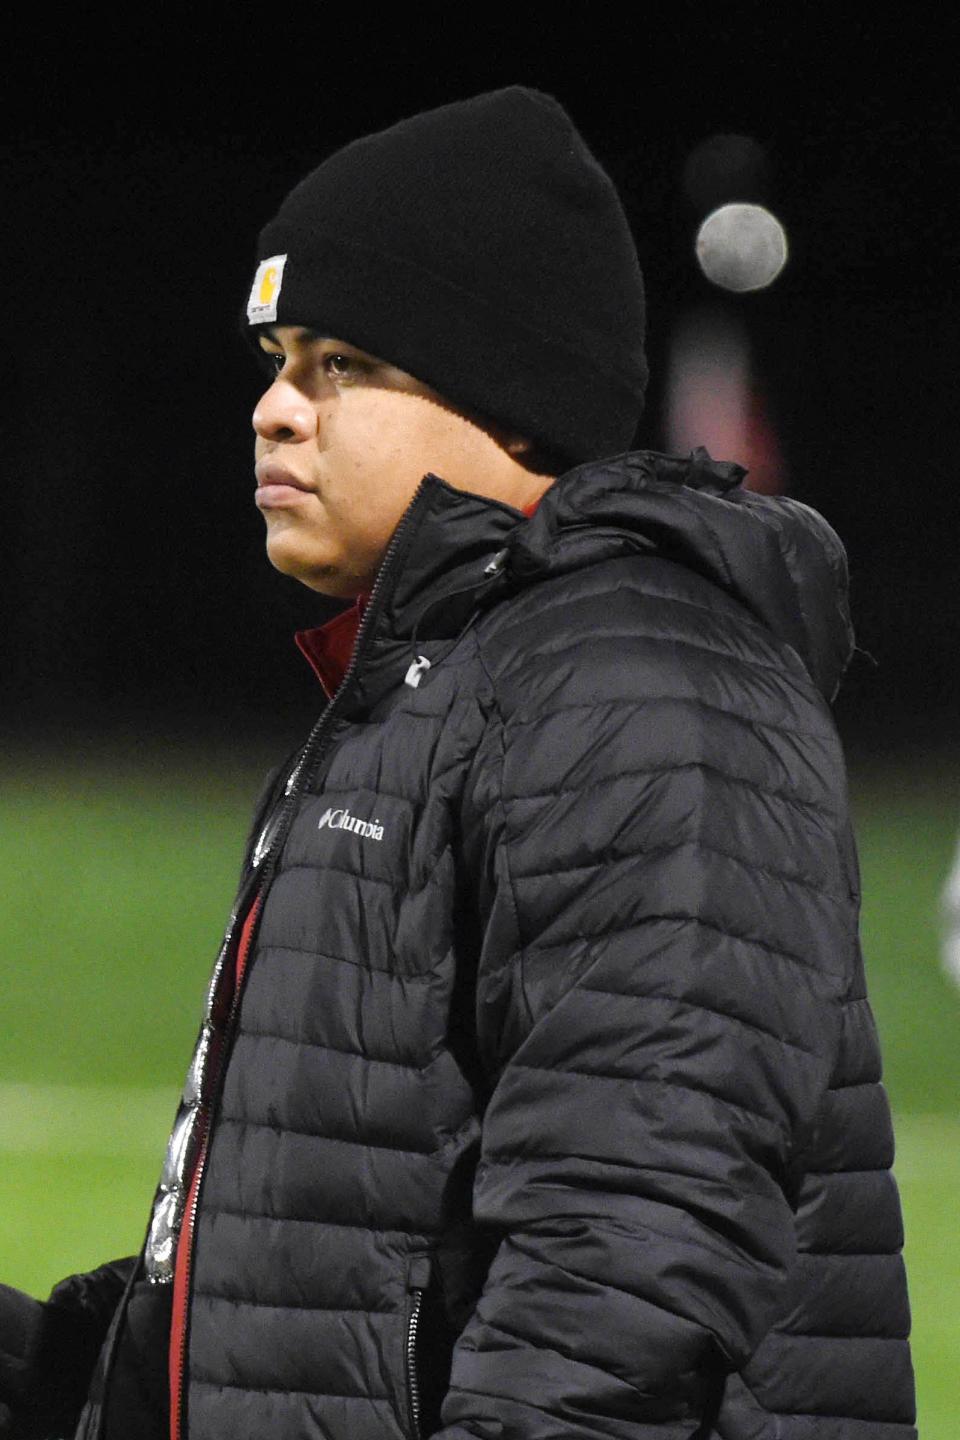 Fort Walton Beach High School soccer coach Mario Rodriguez watches his team from the sidelines during Thursday's home game against Niceville High School.